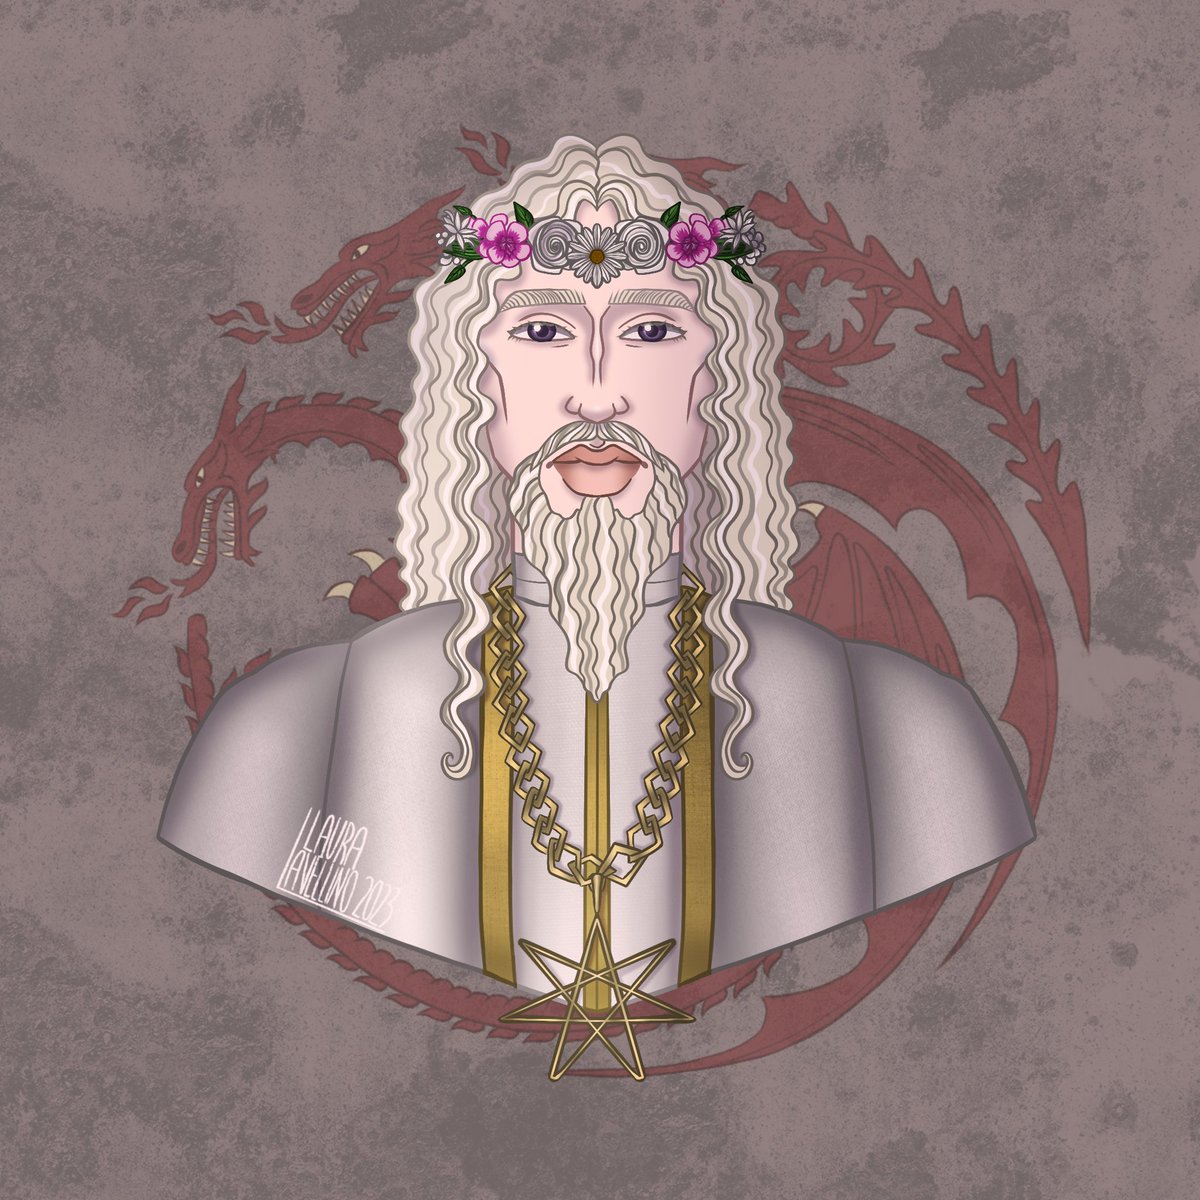 🌸King Baelor I Targaryen⭐️

“[he] proved to be the most pious king in the Targaryen dynasty, and some say in the history of all the Seven Kingdoms…”

#BaelorTargaryen
#HouseTargaryen
#FireandBlood